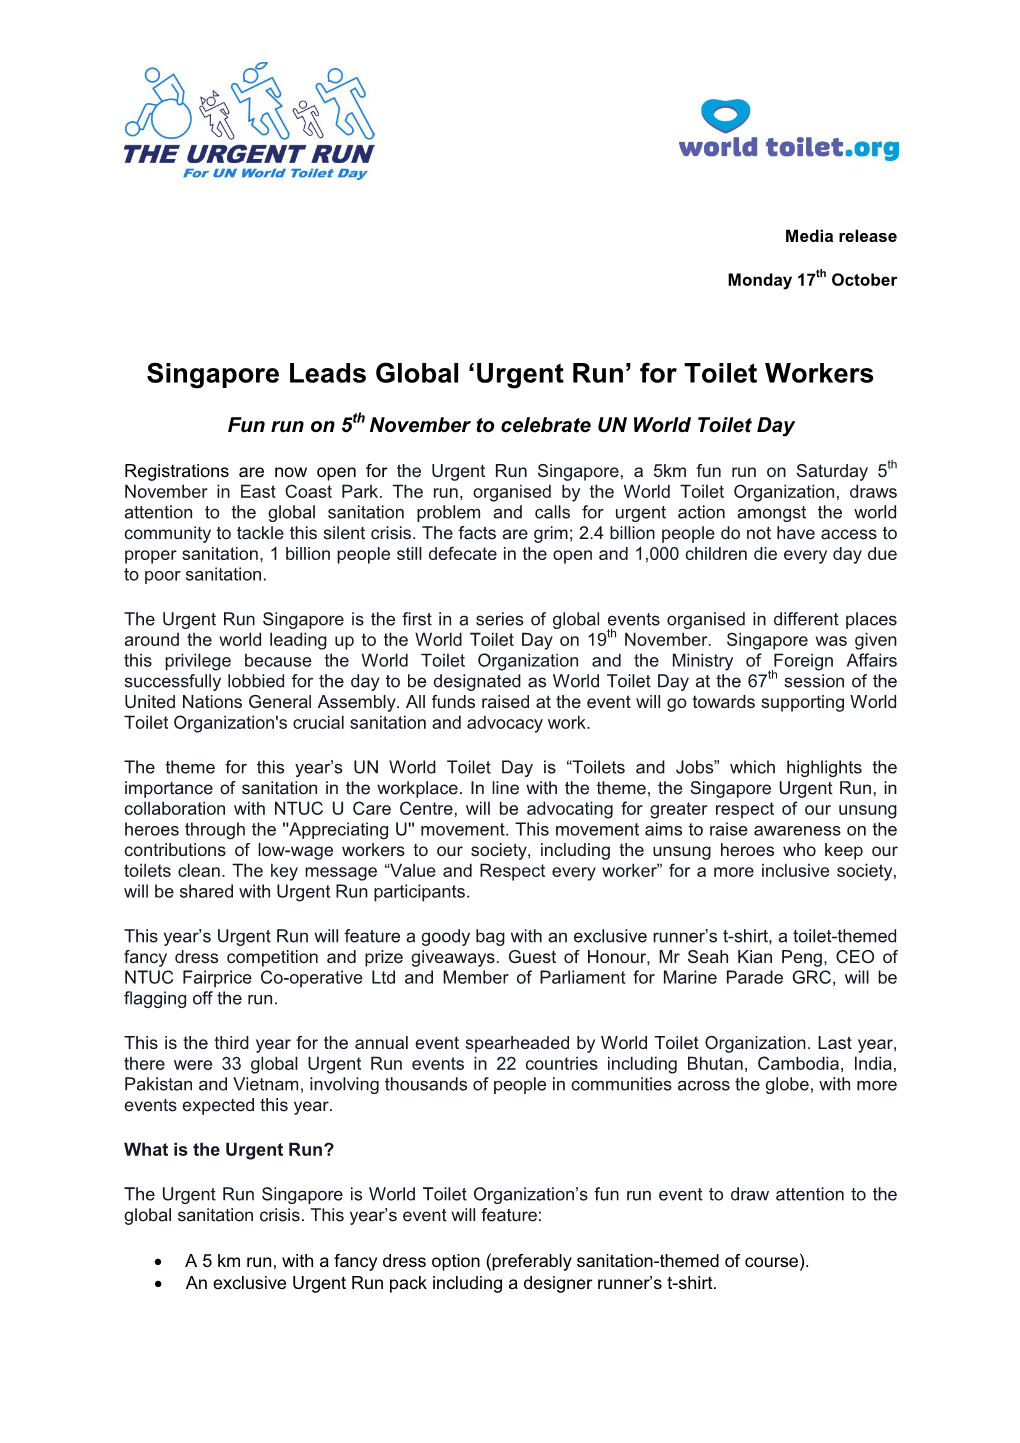 Singapore Leads Global 'Urgent Run' for Toilet Workers